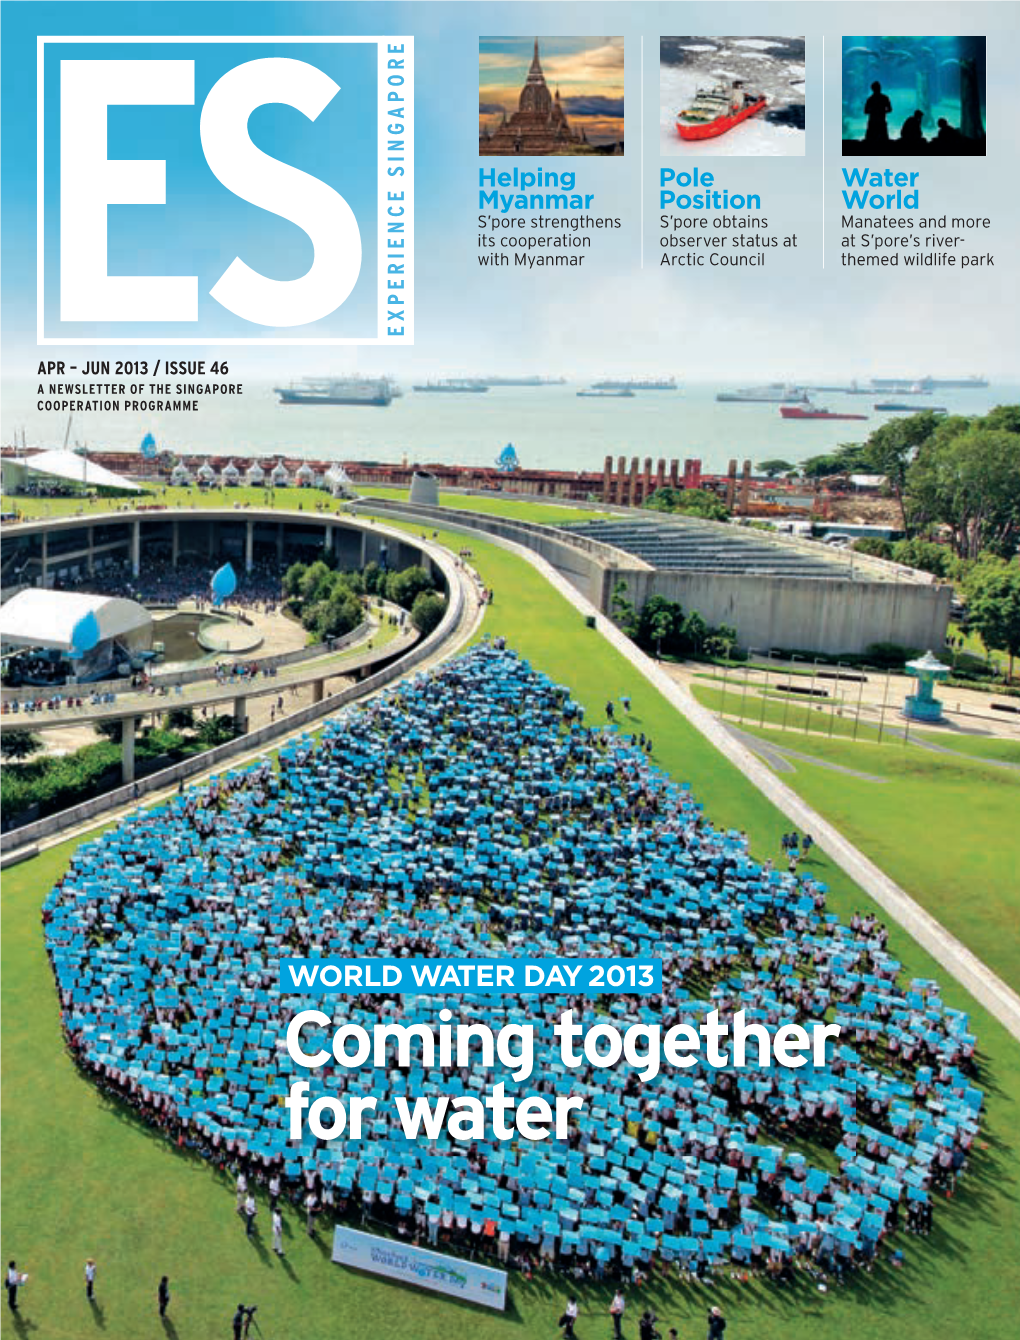 Issue 46 a Newsletter of the Singapore Cooperation Programme